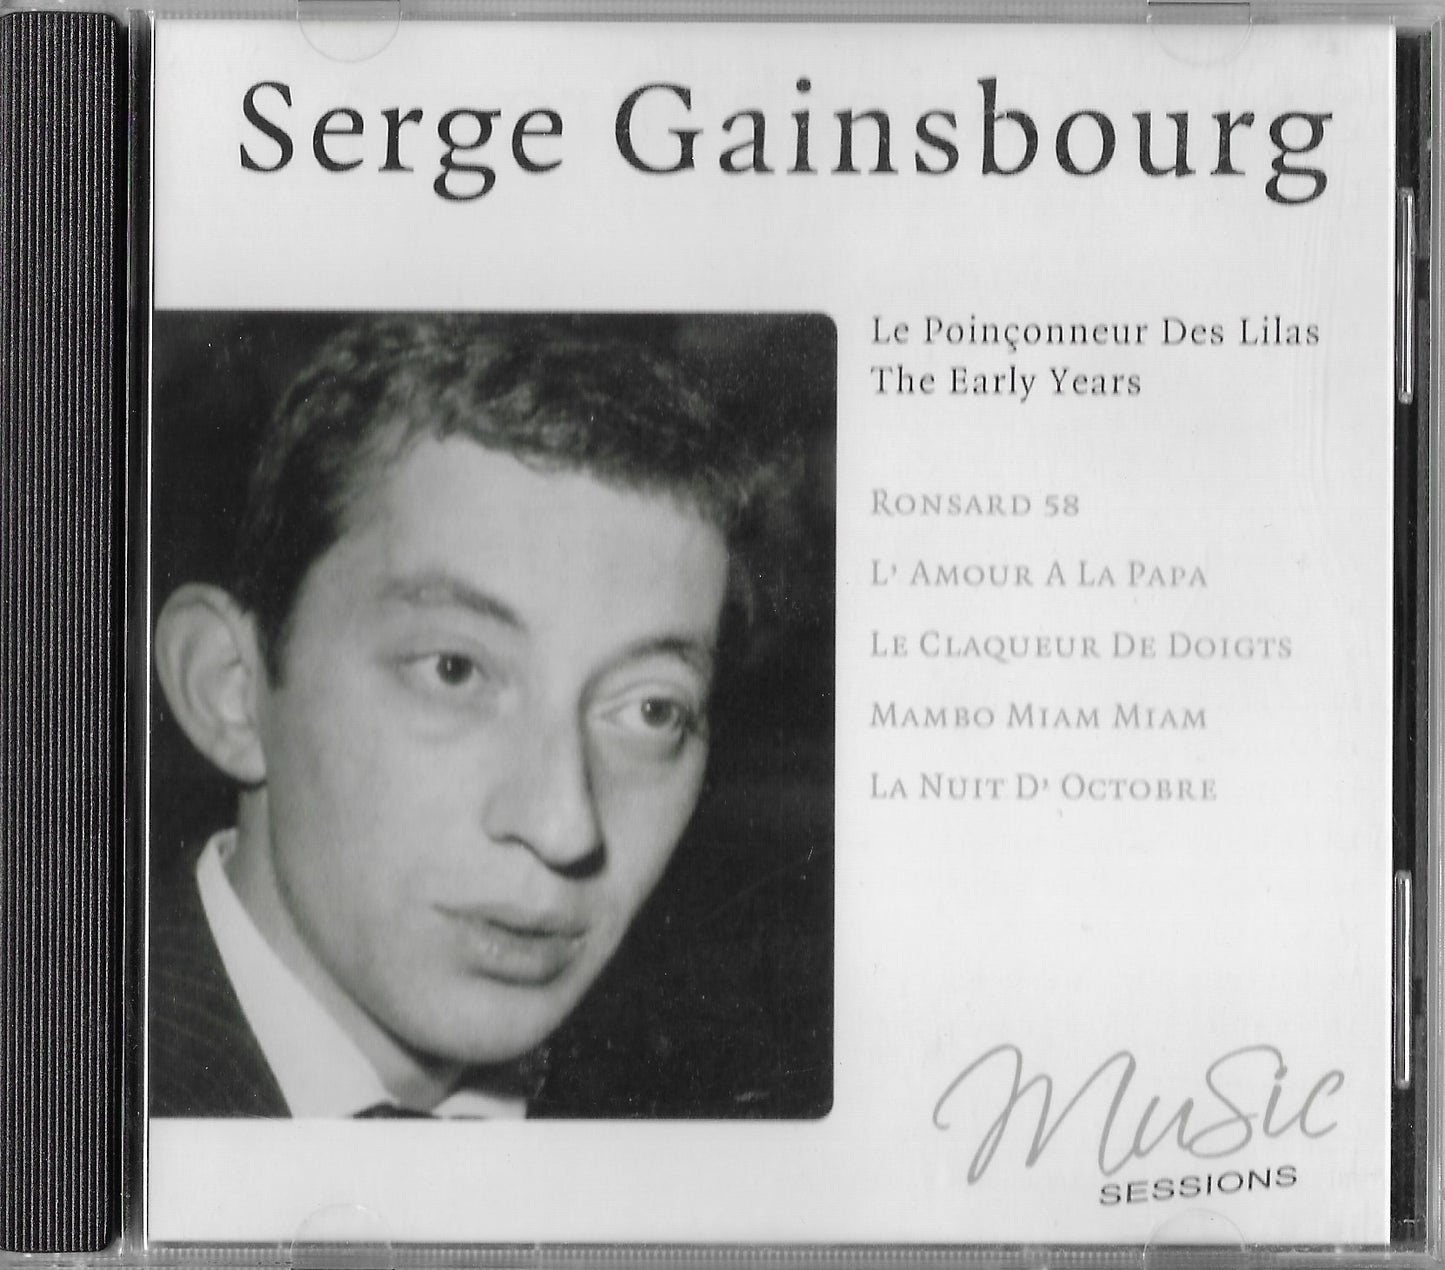 SERGE GAINSBOURG - Le Poinçonneur Des Lilas - The Early Years